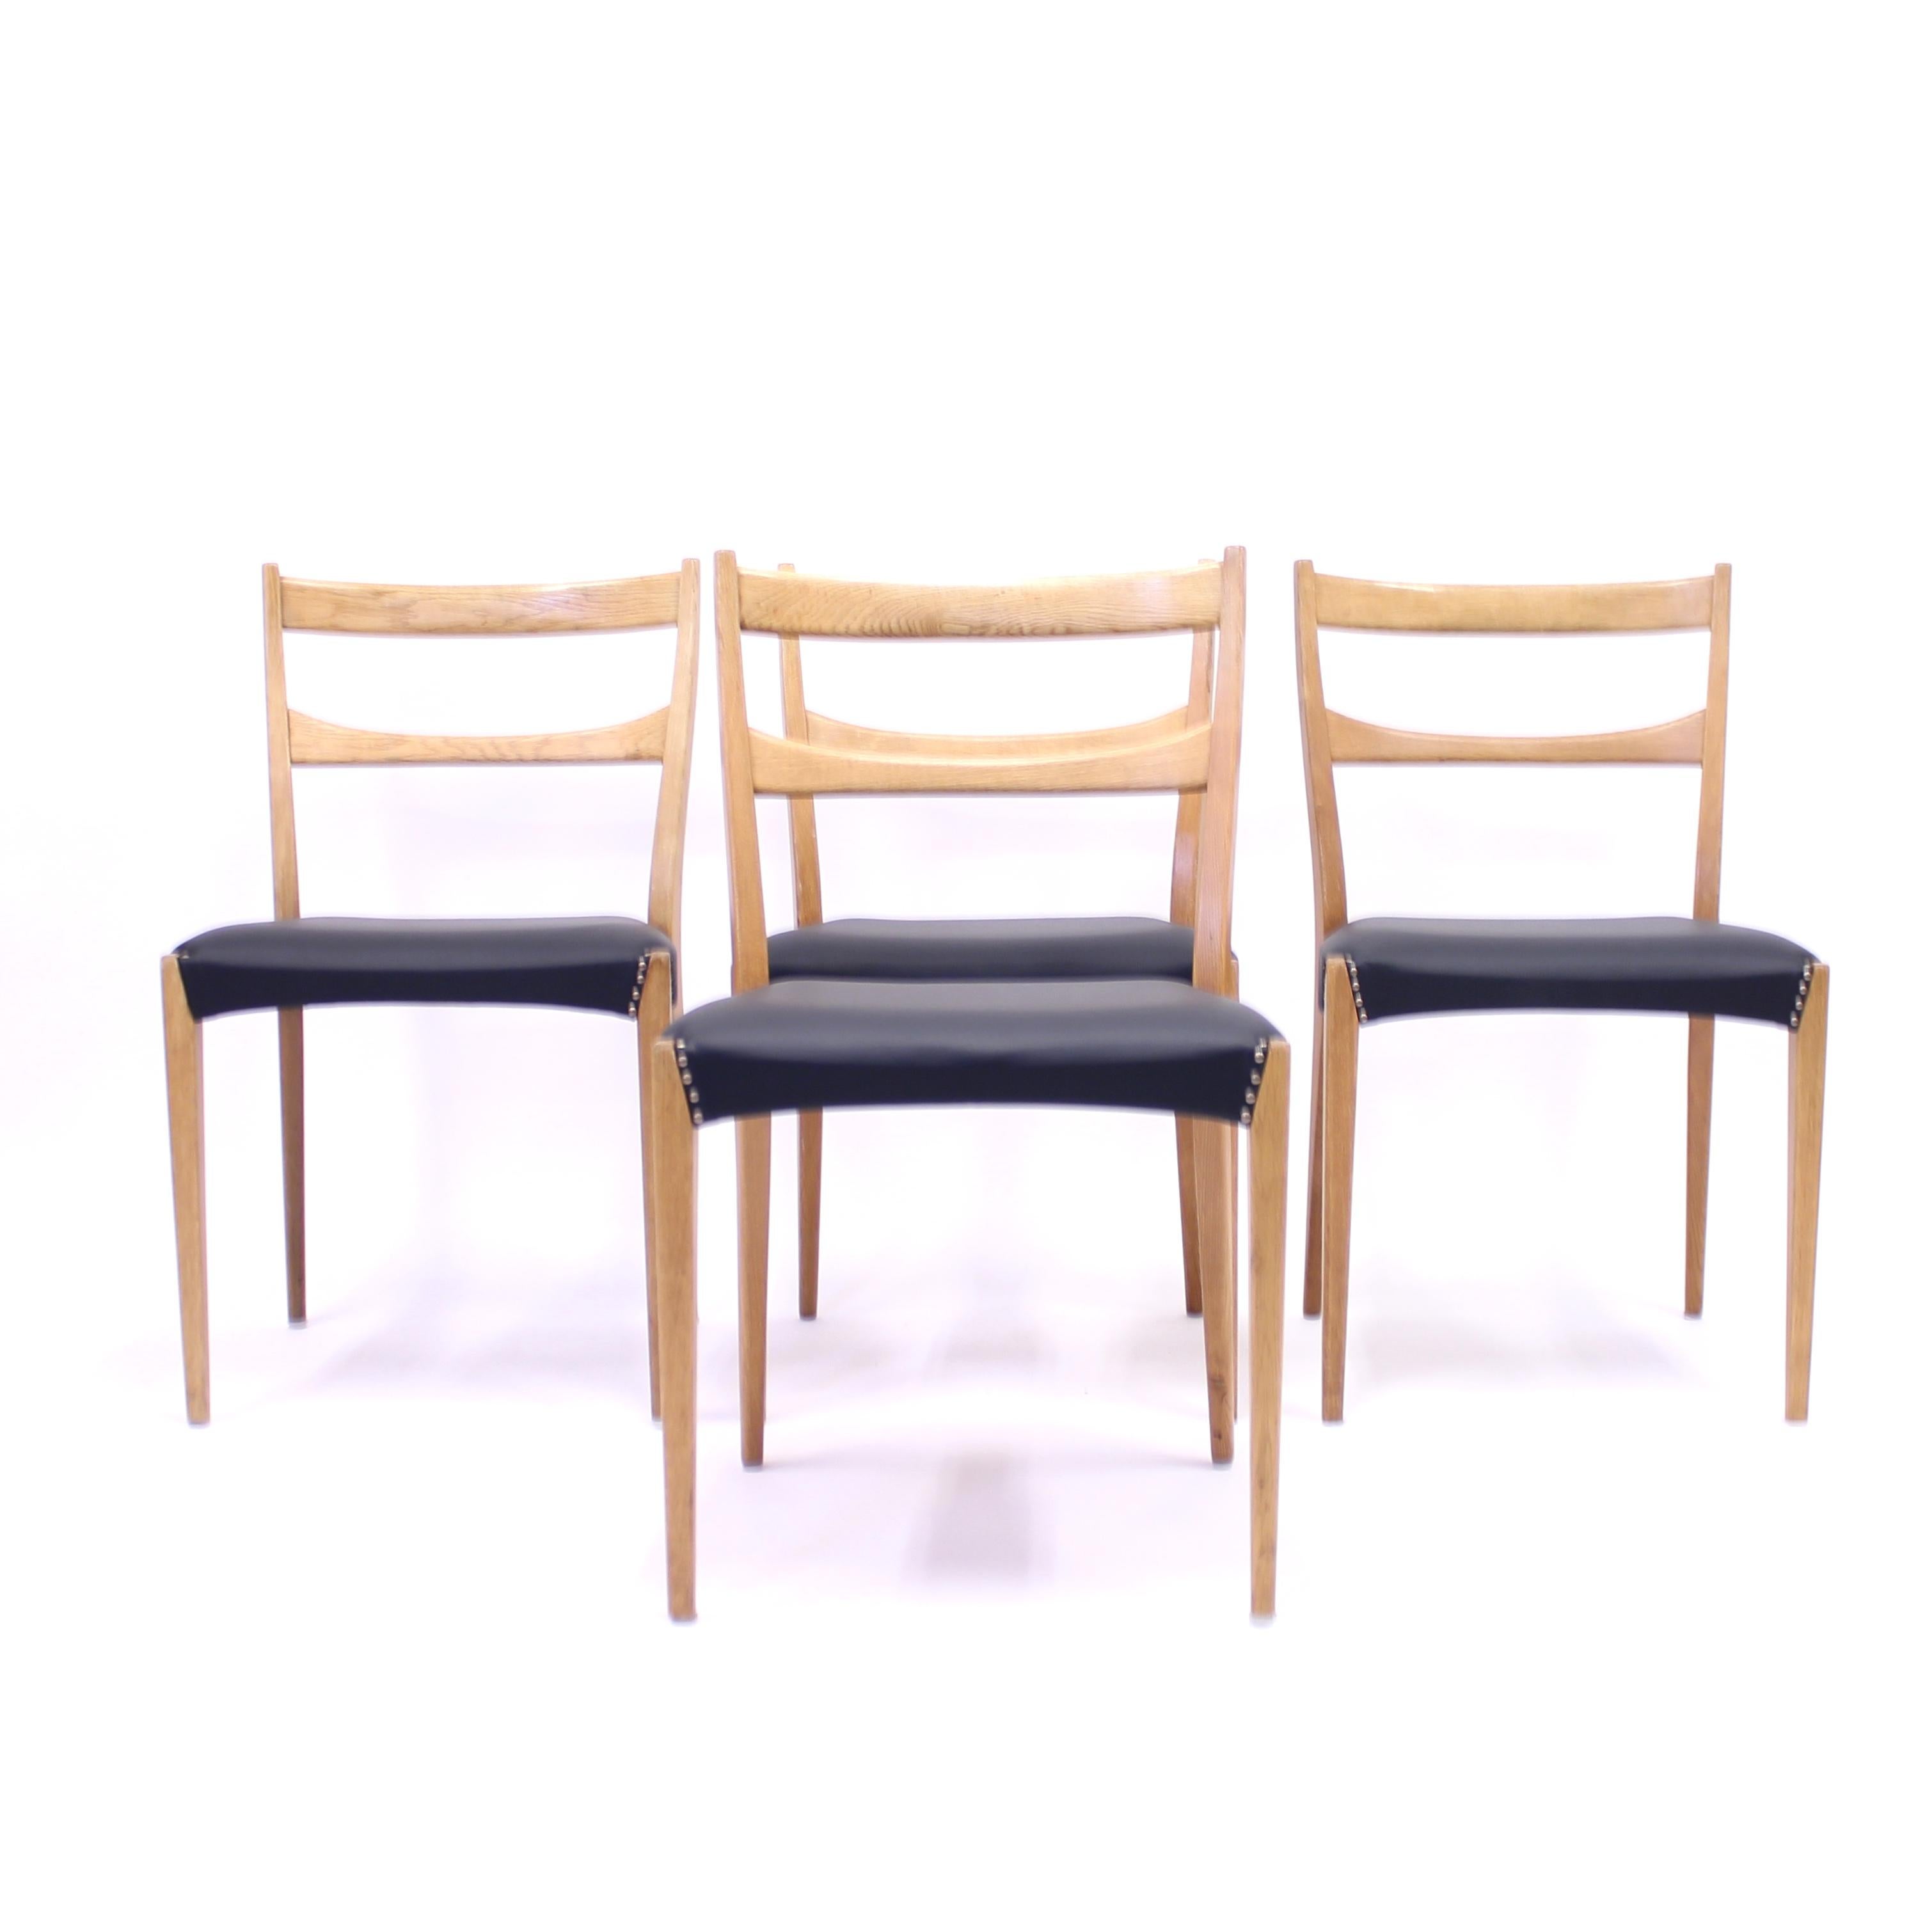 Swedish Scandinavian Oak Dining Chairs with Black Leather Seats, 1950s For Sale